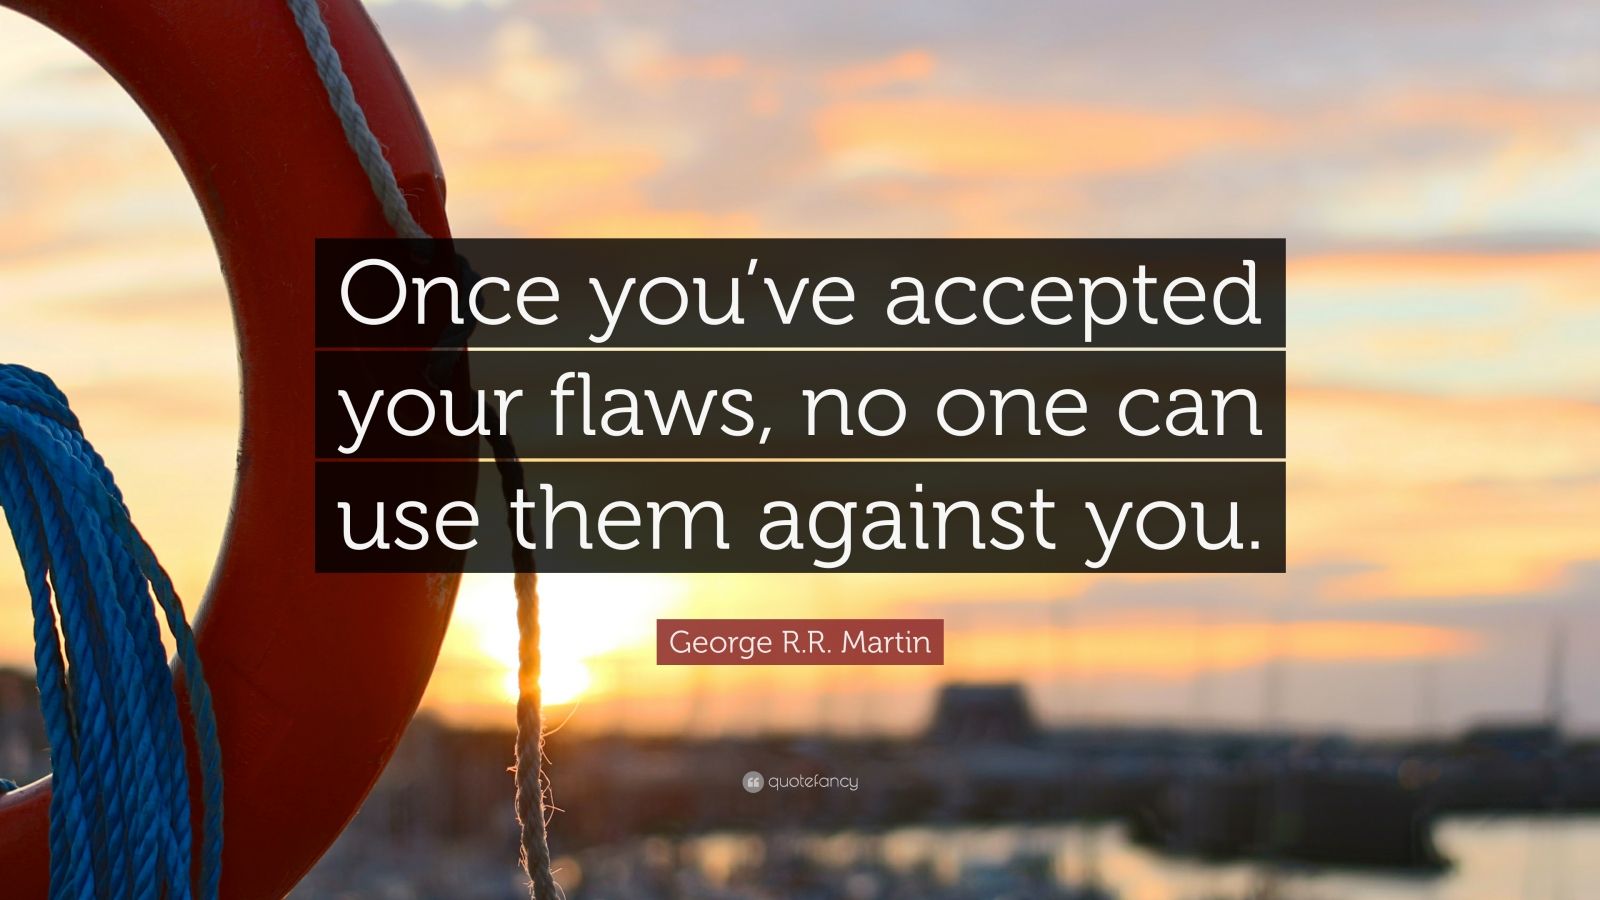 George R.R. Martin Quote: “Once you’ve accepted your flaws ...